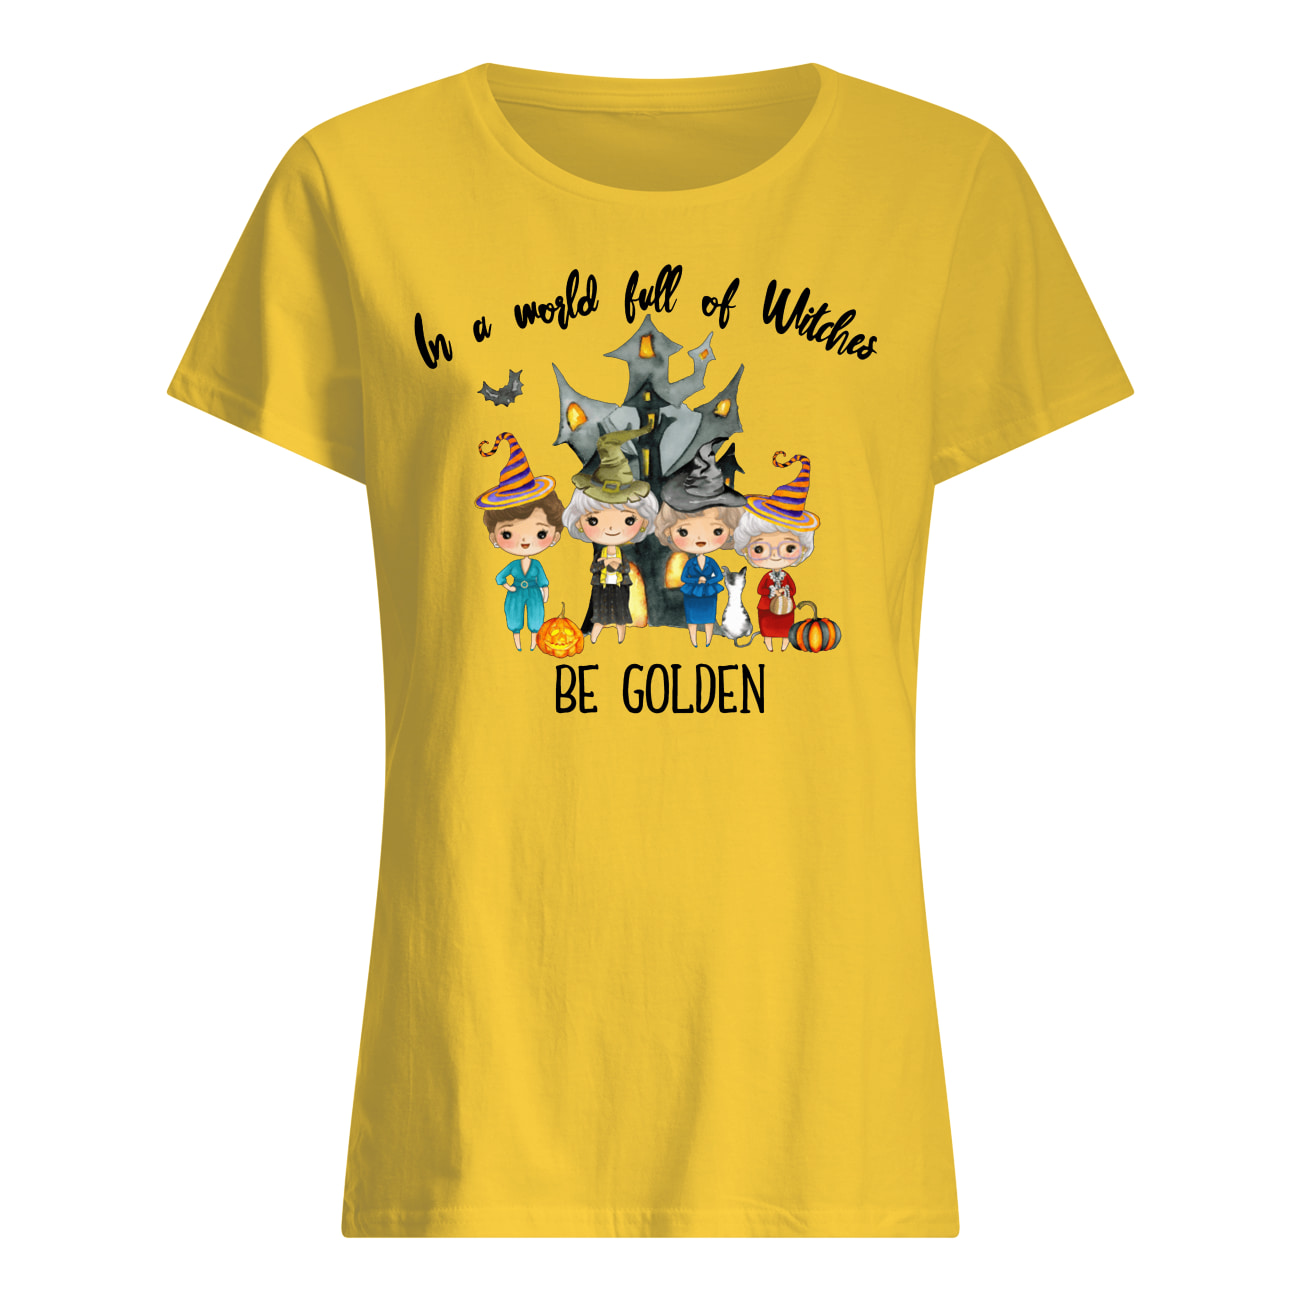 The golden girls in a world full of witches be golden women's shirt